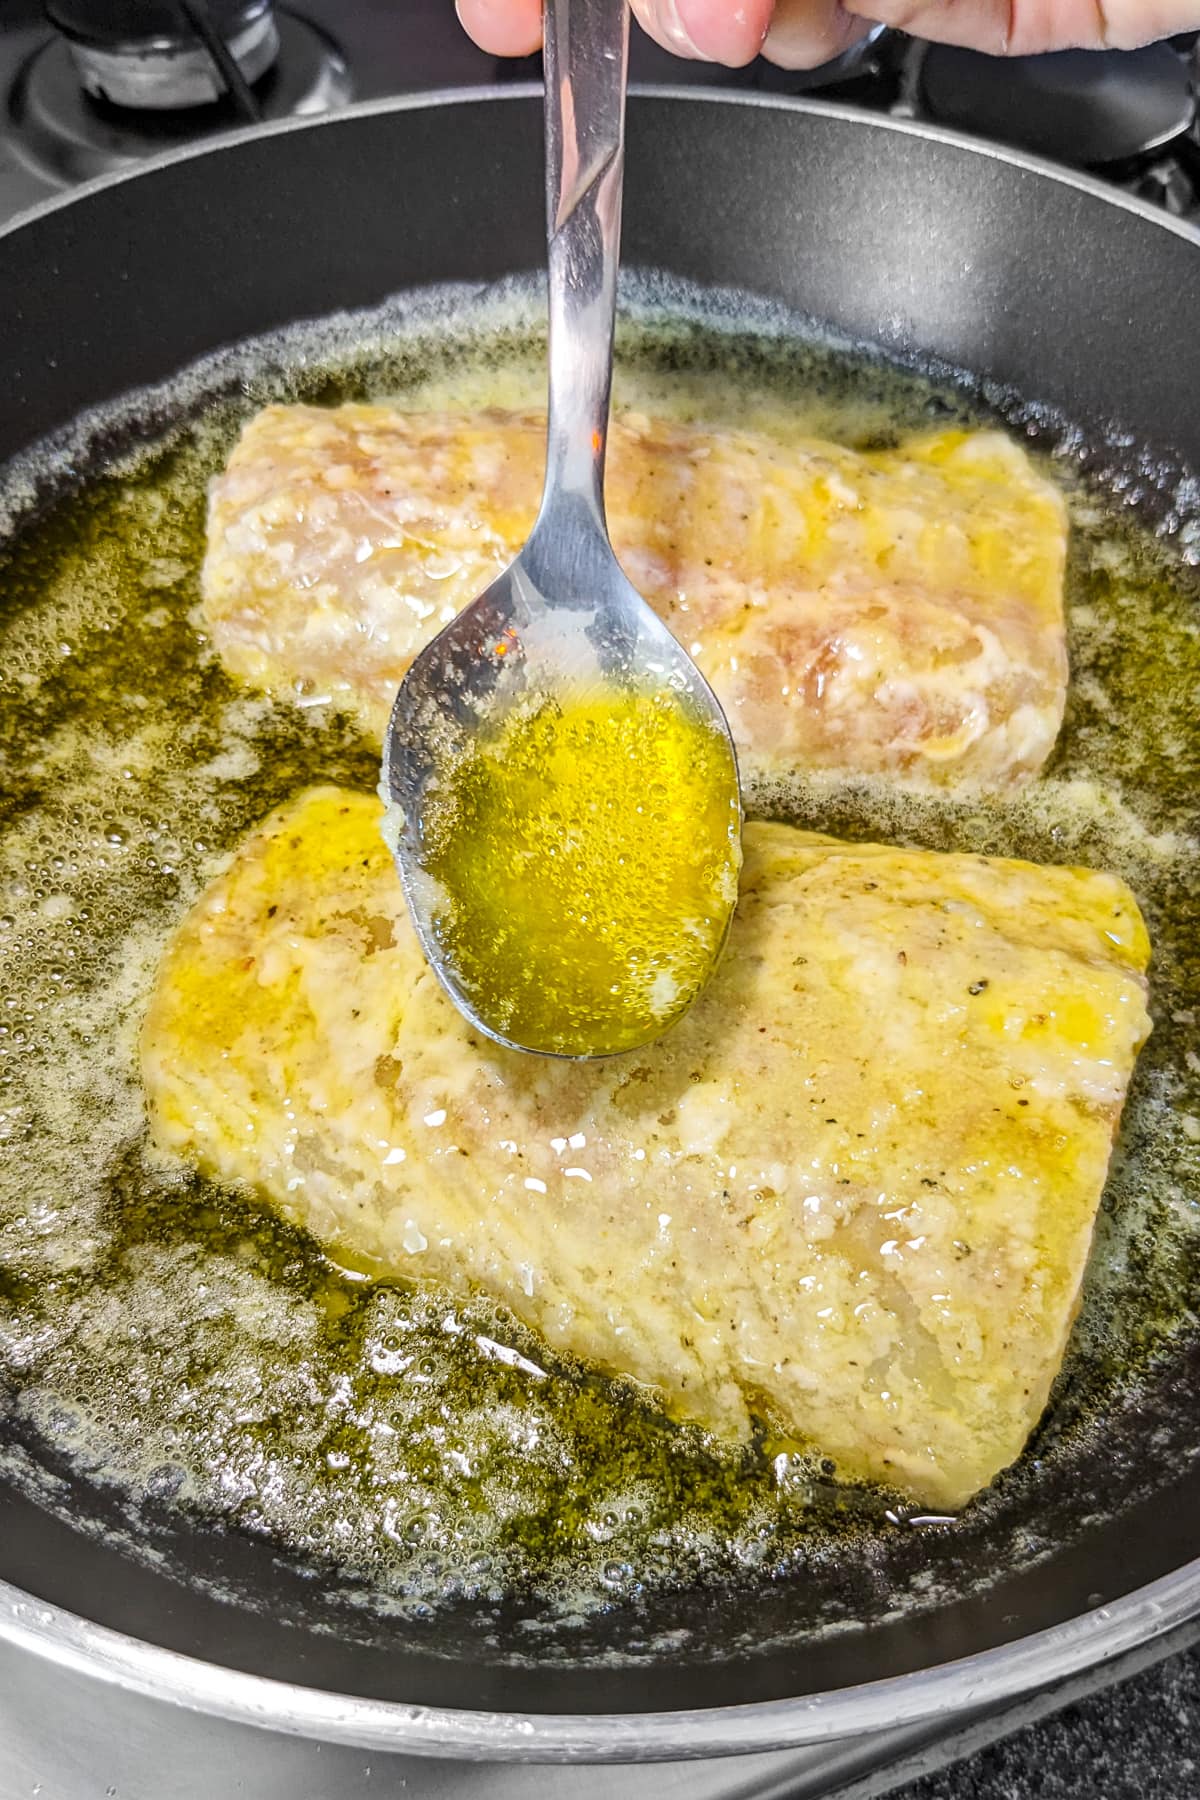 Covering fish fillets with meuniere sauce.